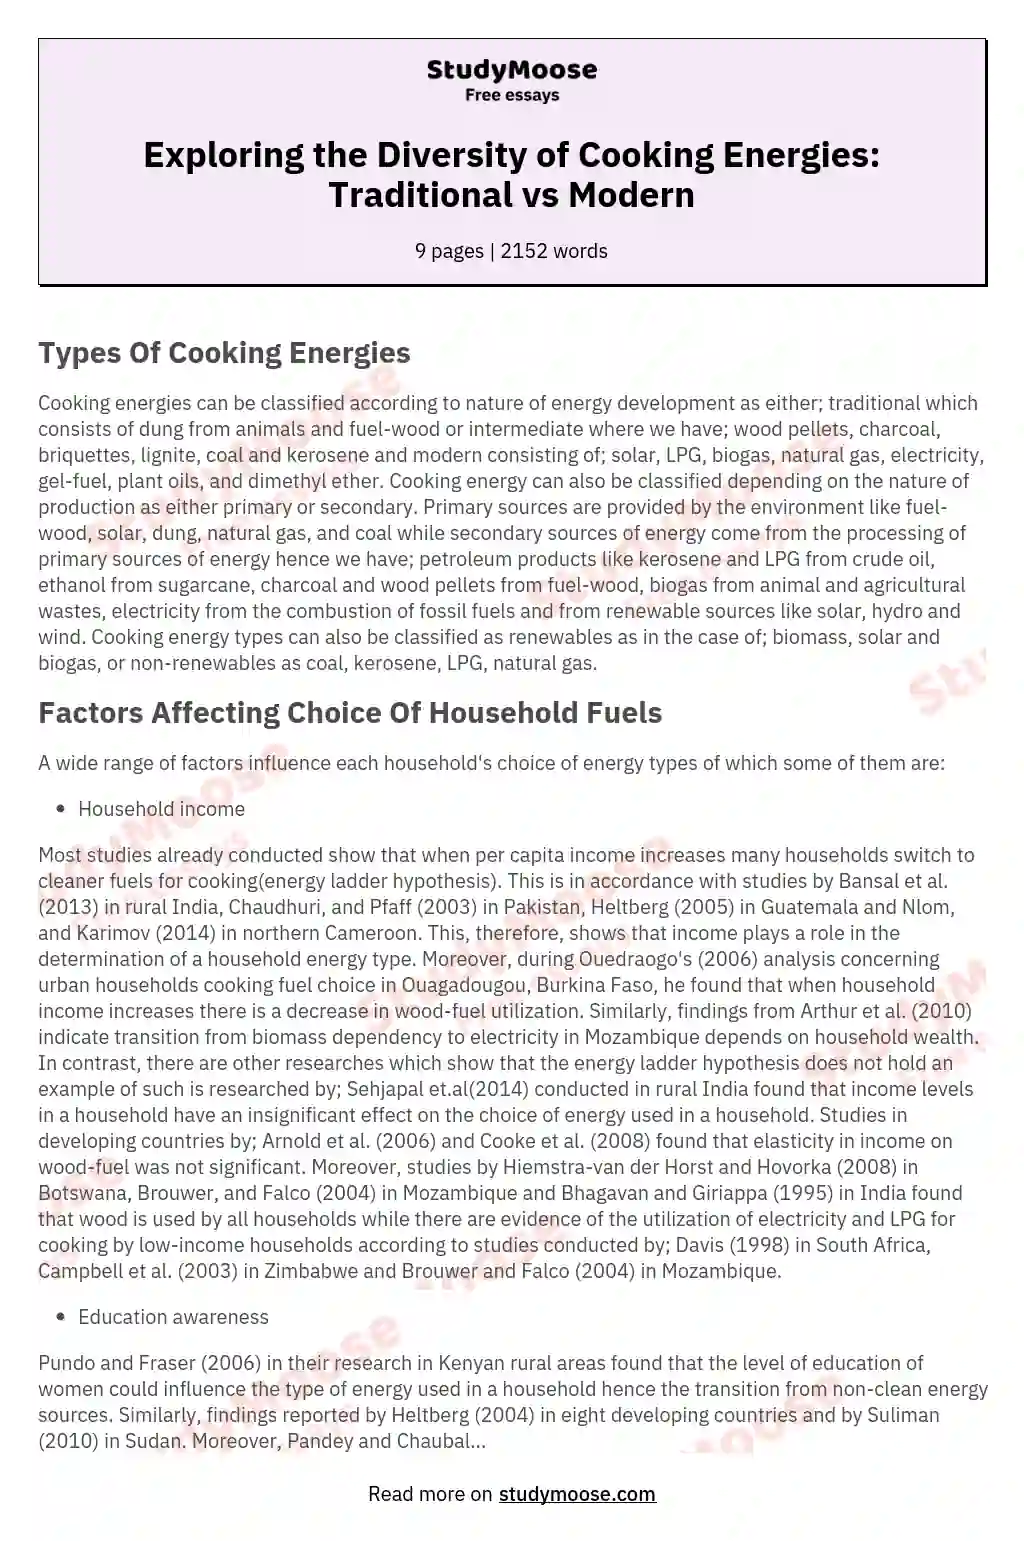 Exploring the Diversity of Cooking Energies: Traditional vs Modern essay